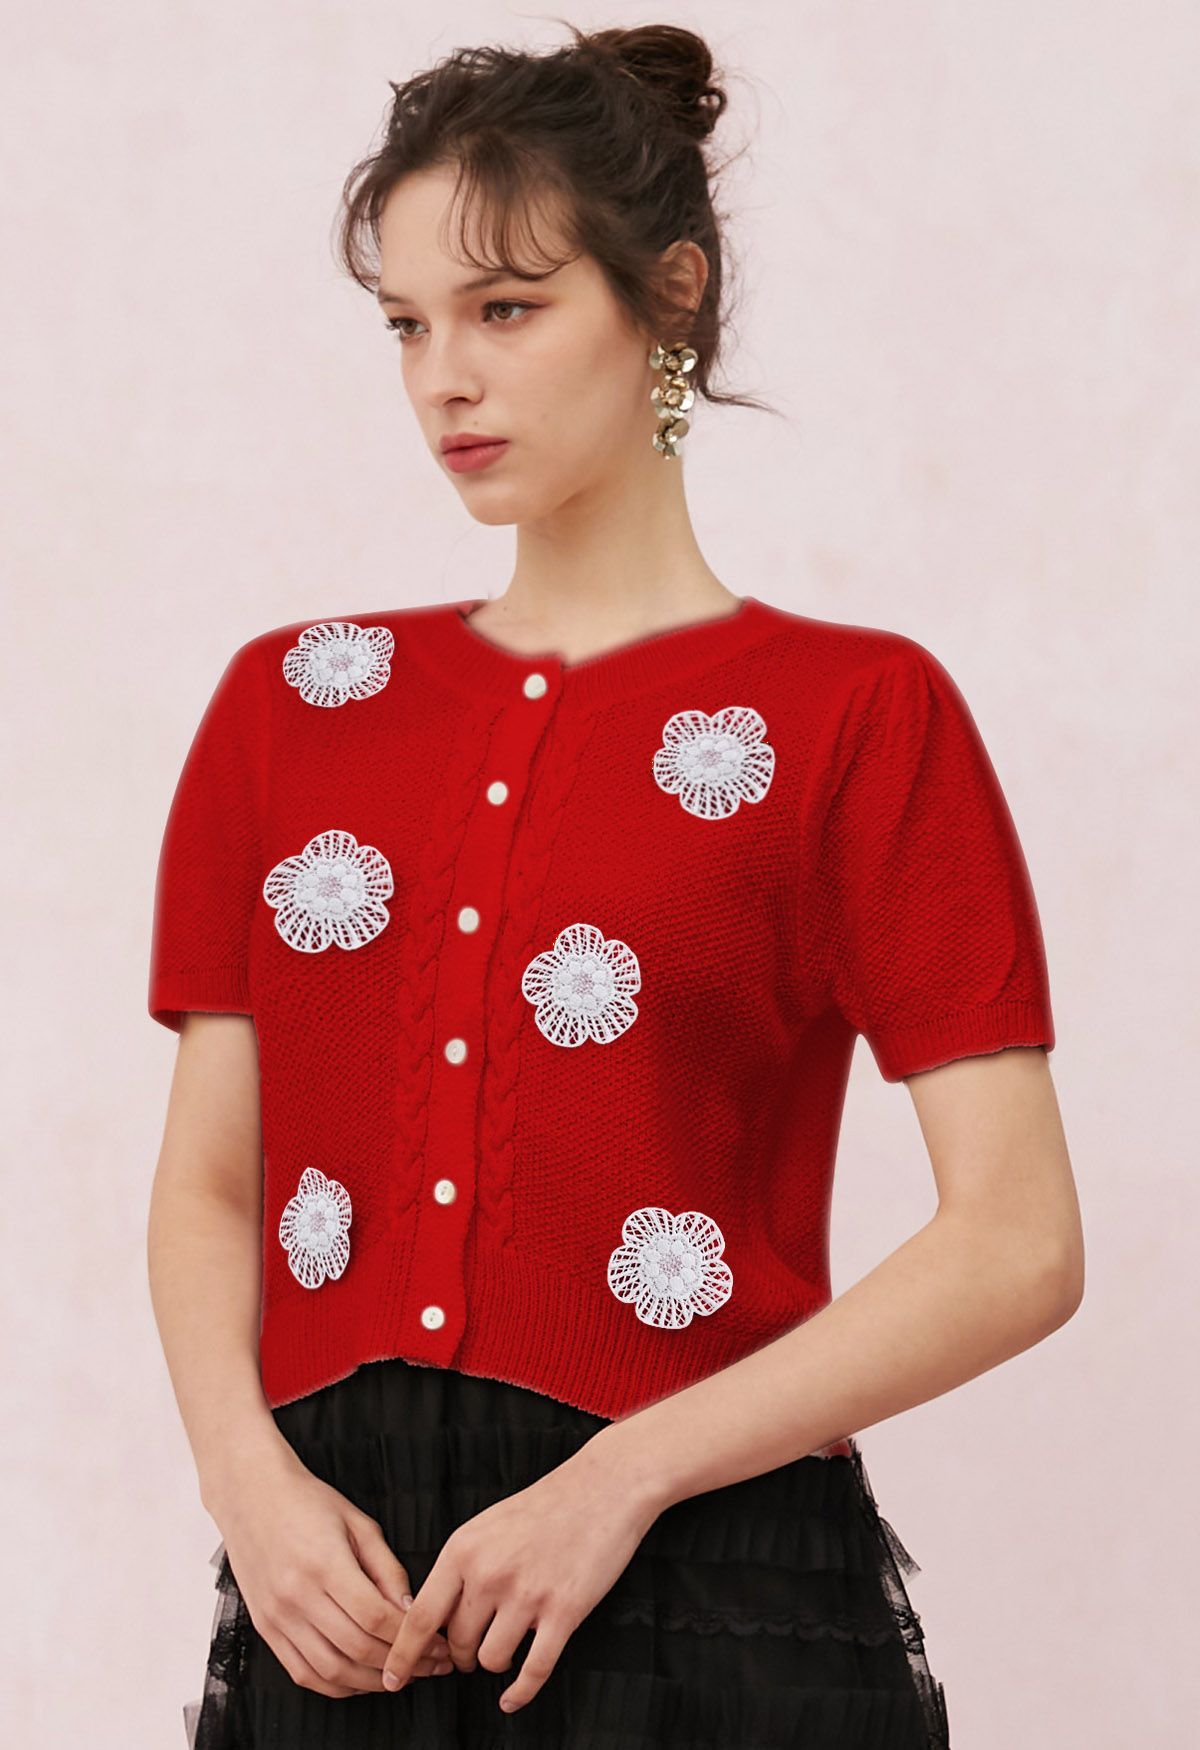 Crochet Flower Adorned Short Sleeve Knit Cardigan in Red | Chicwish